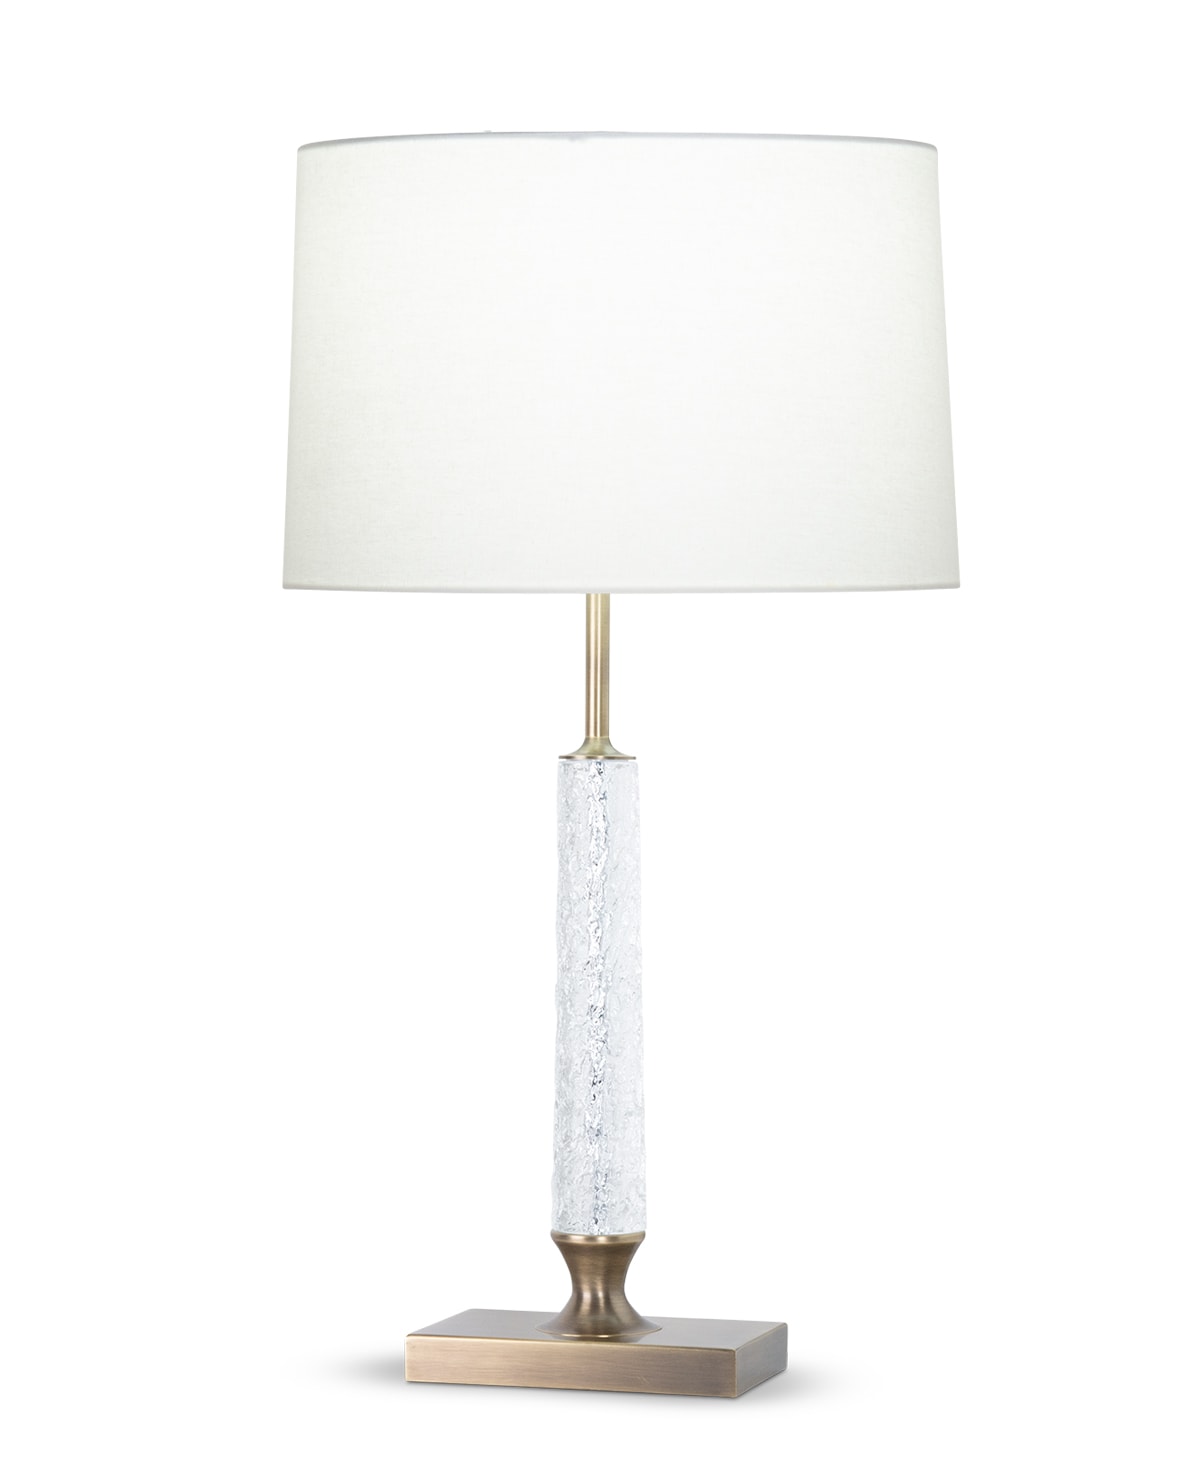 FlowDecor Mckenna Table Lamp in metal with antique brass finish and crystal and off-white linen oval shade (# 4553)